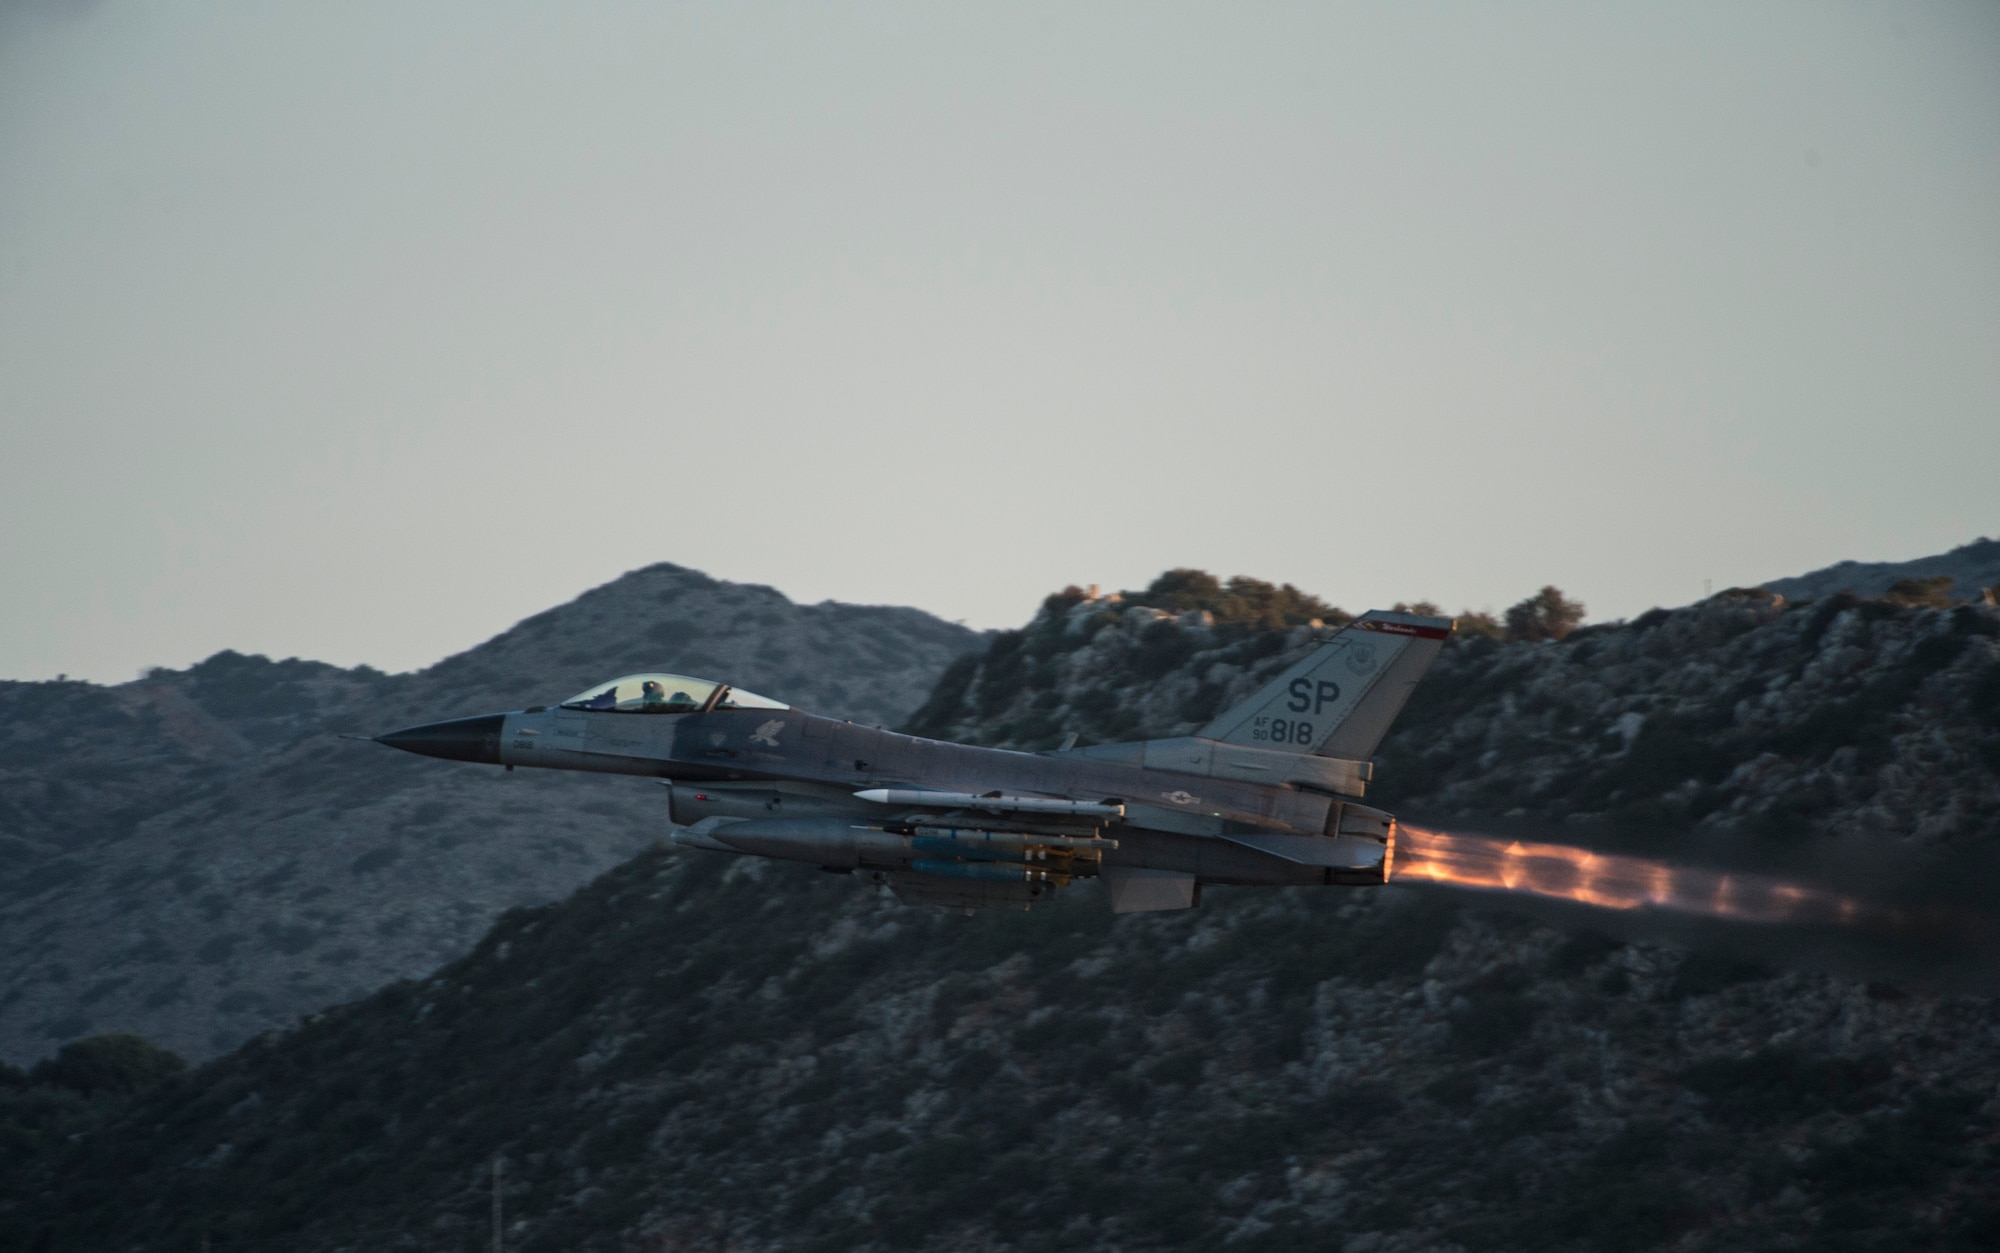 A U.S. Air Force F-16 Fighting Falcon fighter aircraft pilot assigned to the 480th Expeditionary Fighter Squadron takes off from the flightline during a flying training deployment at Souda Bay, Greece, Feb. 1, 2016. The training included more than 15 aircraft launches a day as part of the training between the U.S. and Hellenic air forces. (U.S. Air Force photo by Staff Sgt. Christopher Ruano/Released)